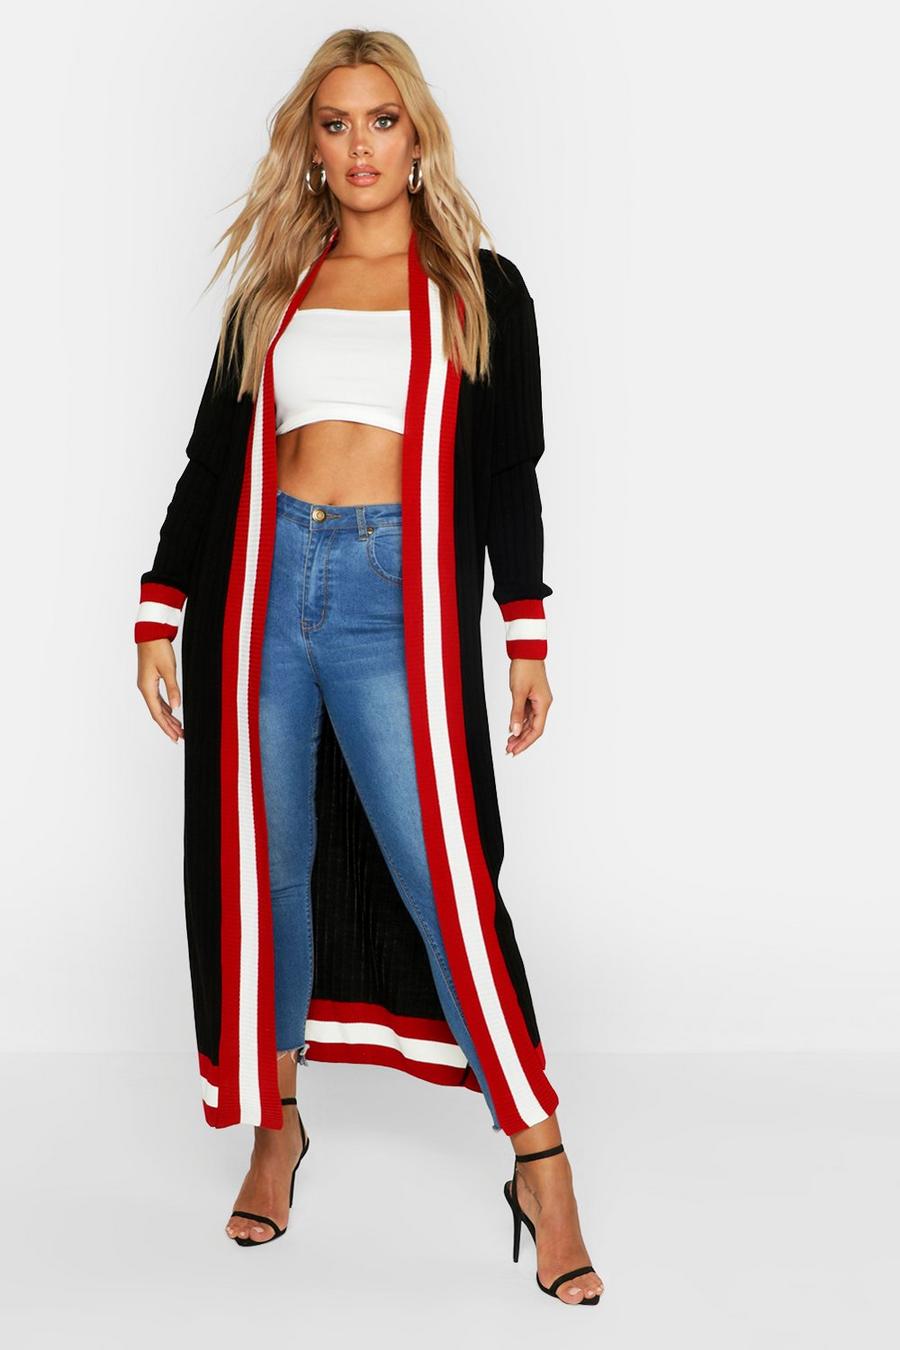 The Stripped Printed Ribbed Long Knitted Cardigan